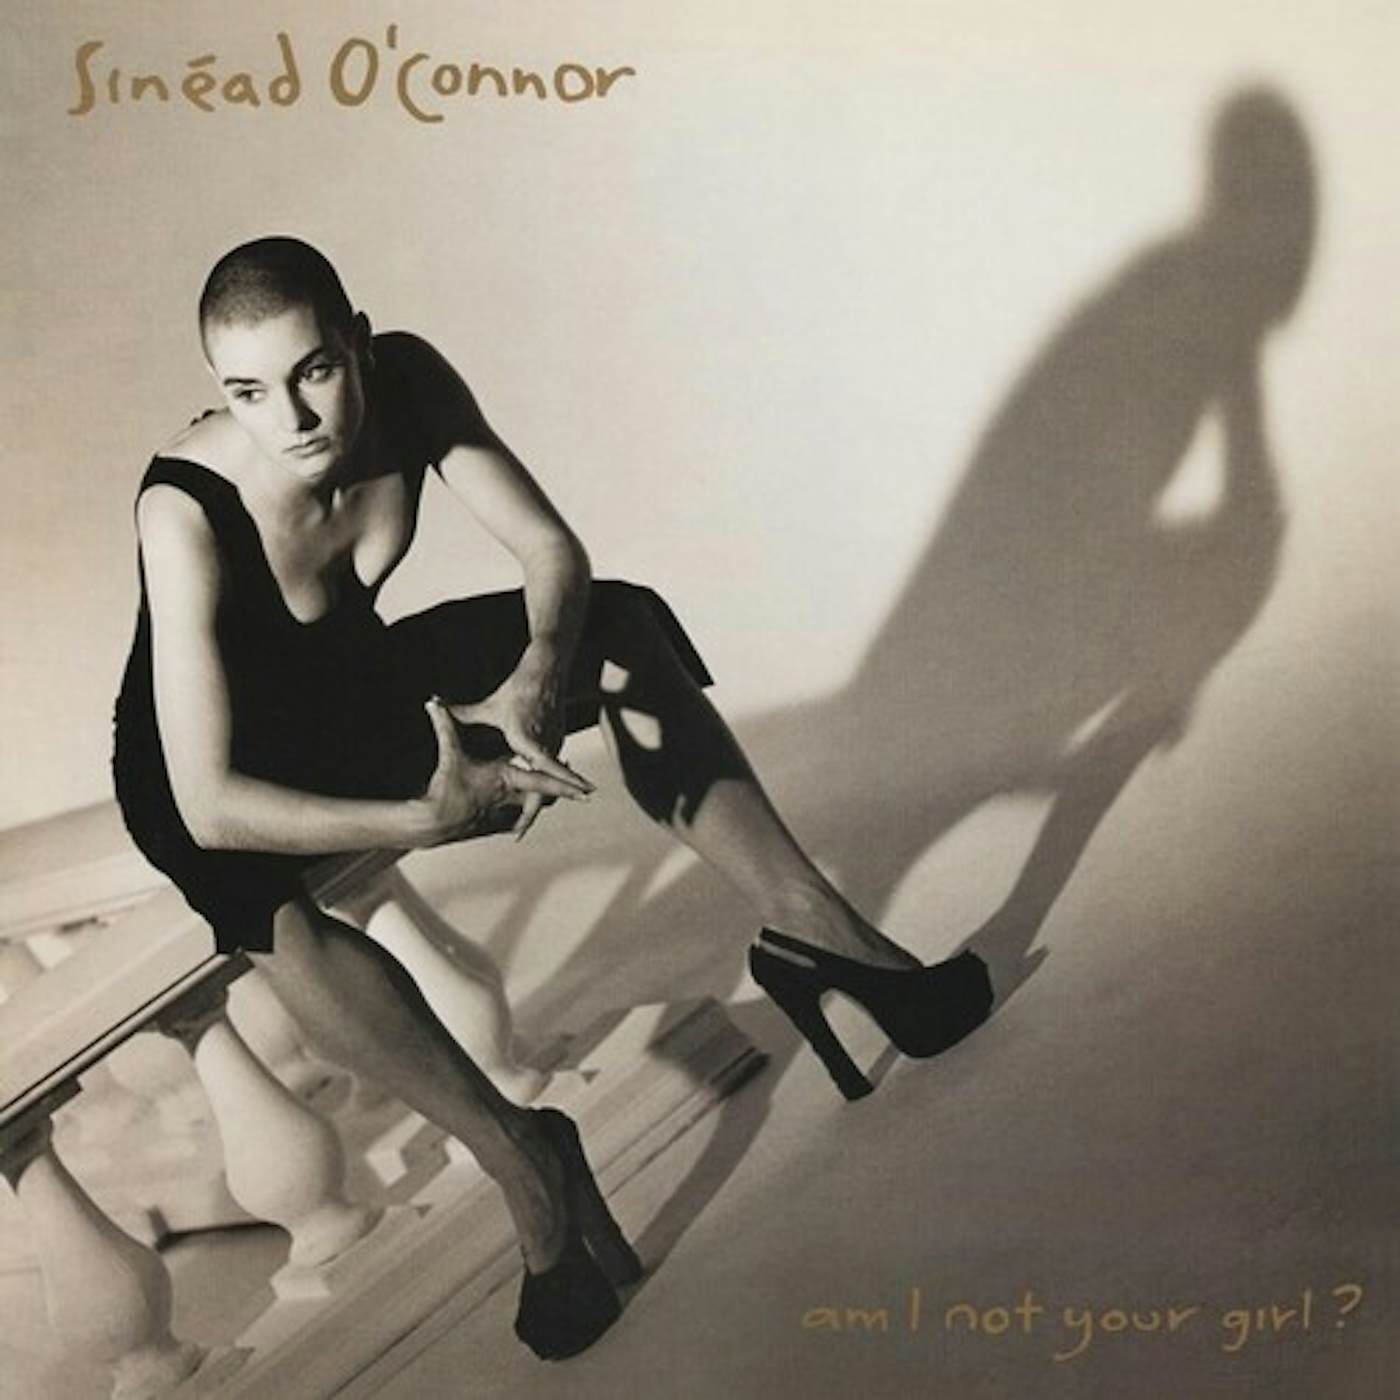 Sinéad O'Connor AM I NOT YOUR GIRL CD